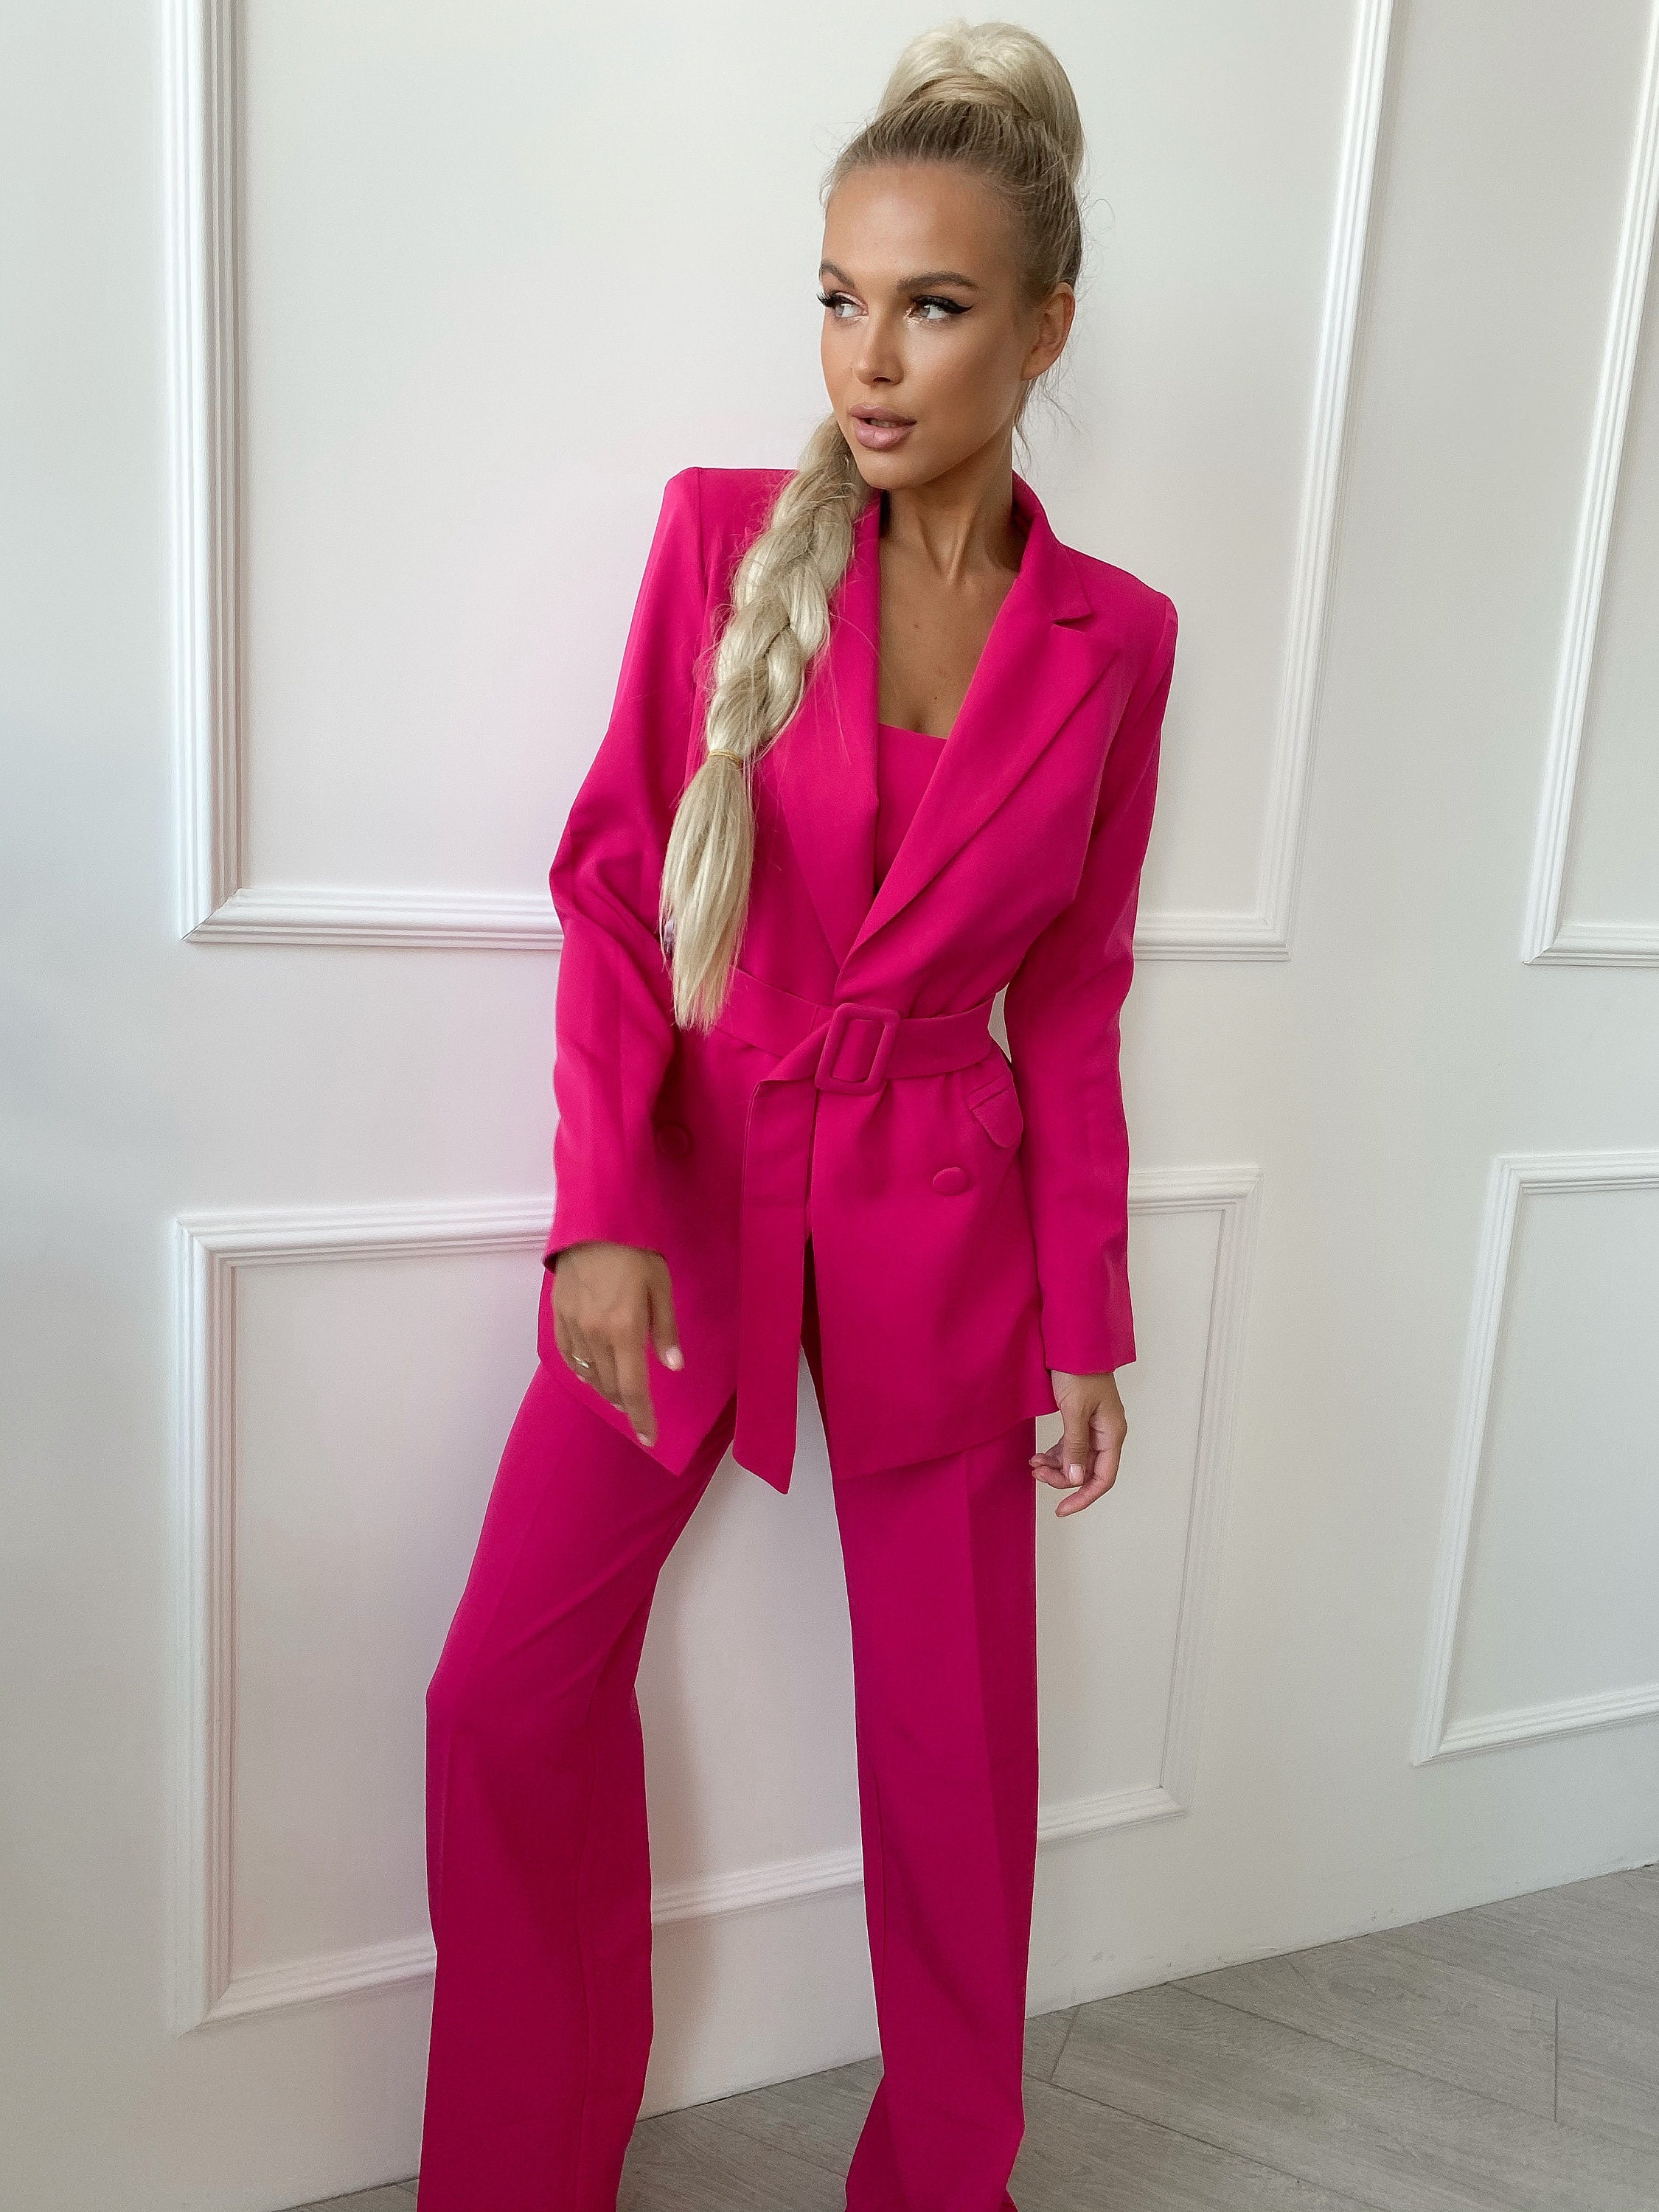 Buy Hot Pink Blazer Trouser Suit for Women, Pink Pantsuit for